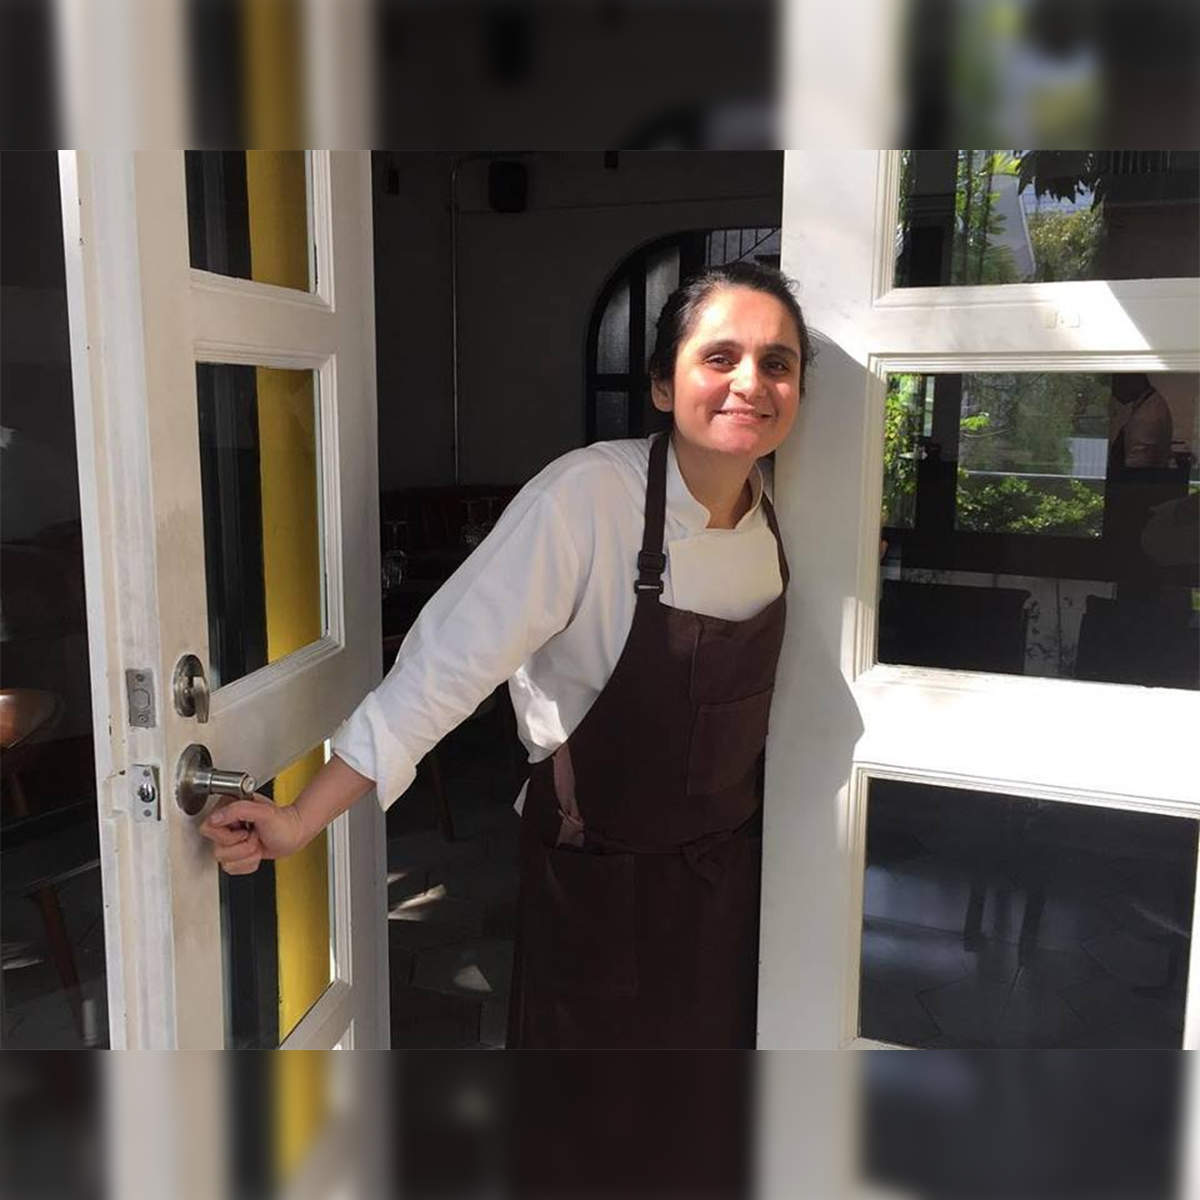 10 seats only! Gaggan Anand is gearing up to open world's 'most  inaccessible restaurant' - The Economic Times